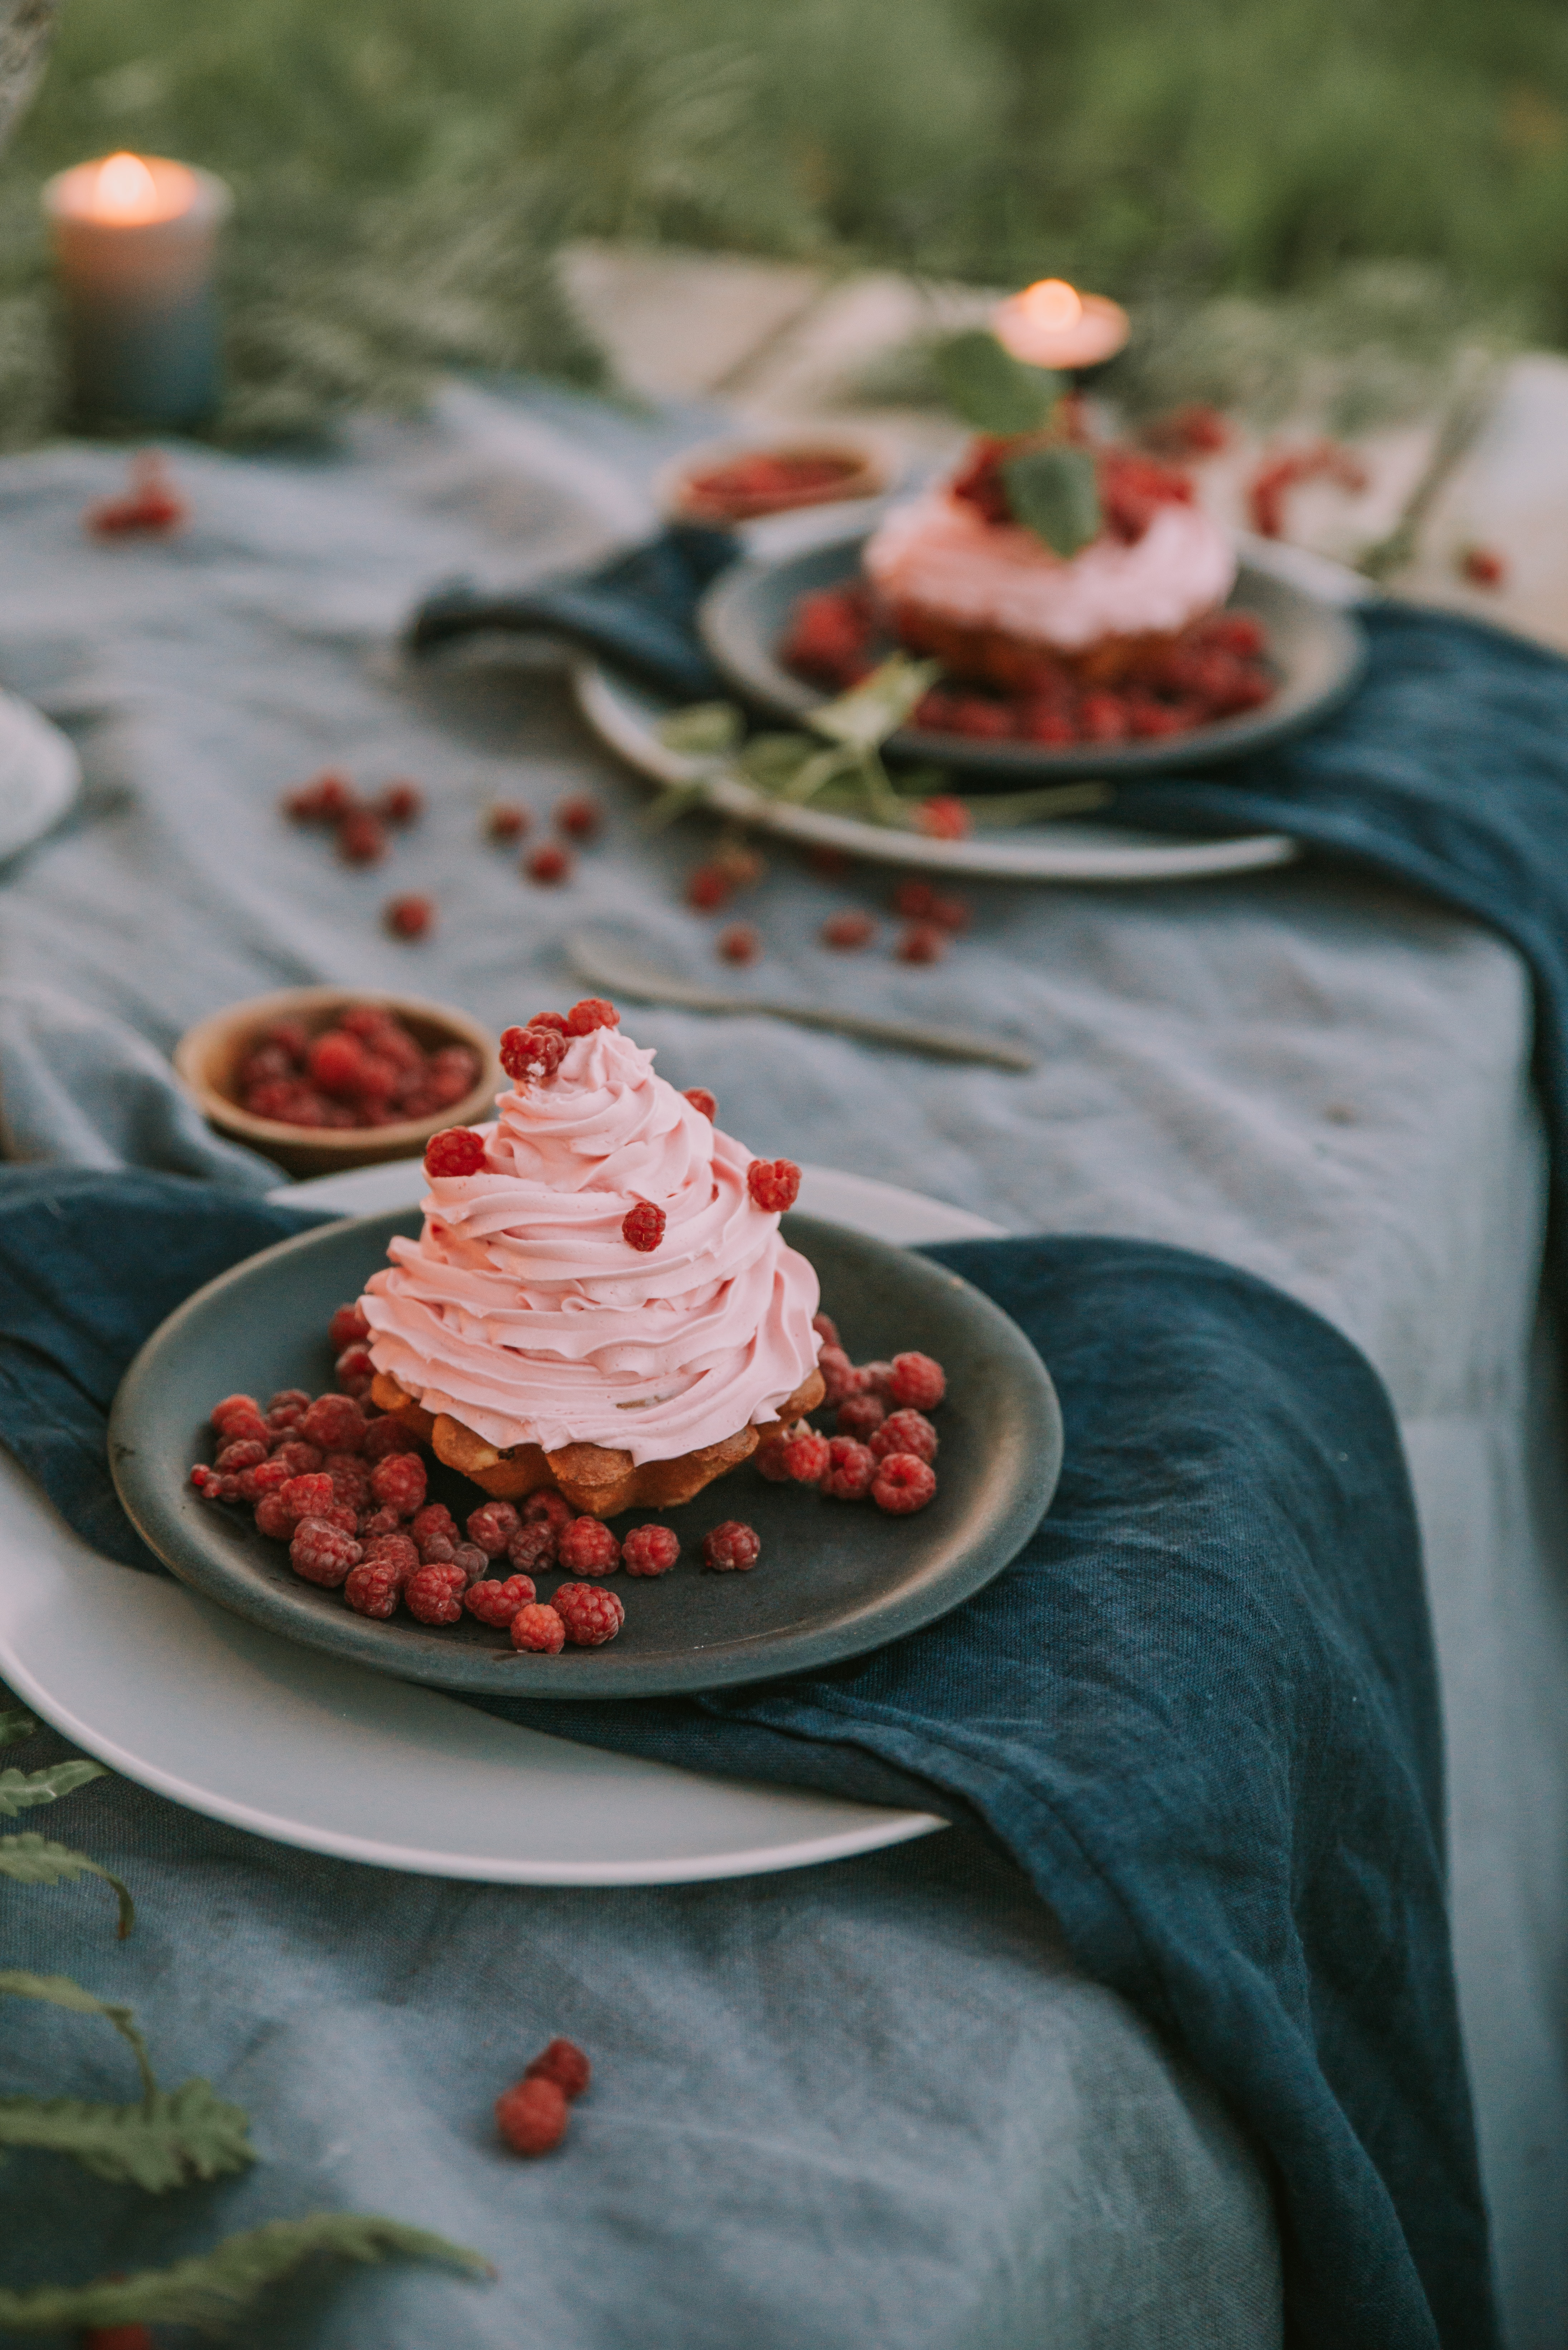 122483 download wallpaper cake, food, raspberry, desert, berries, cream screensavers and pictures for free